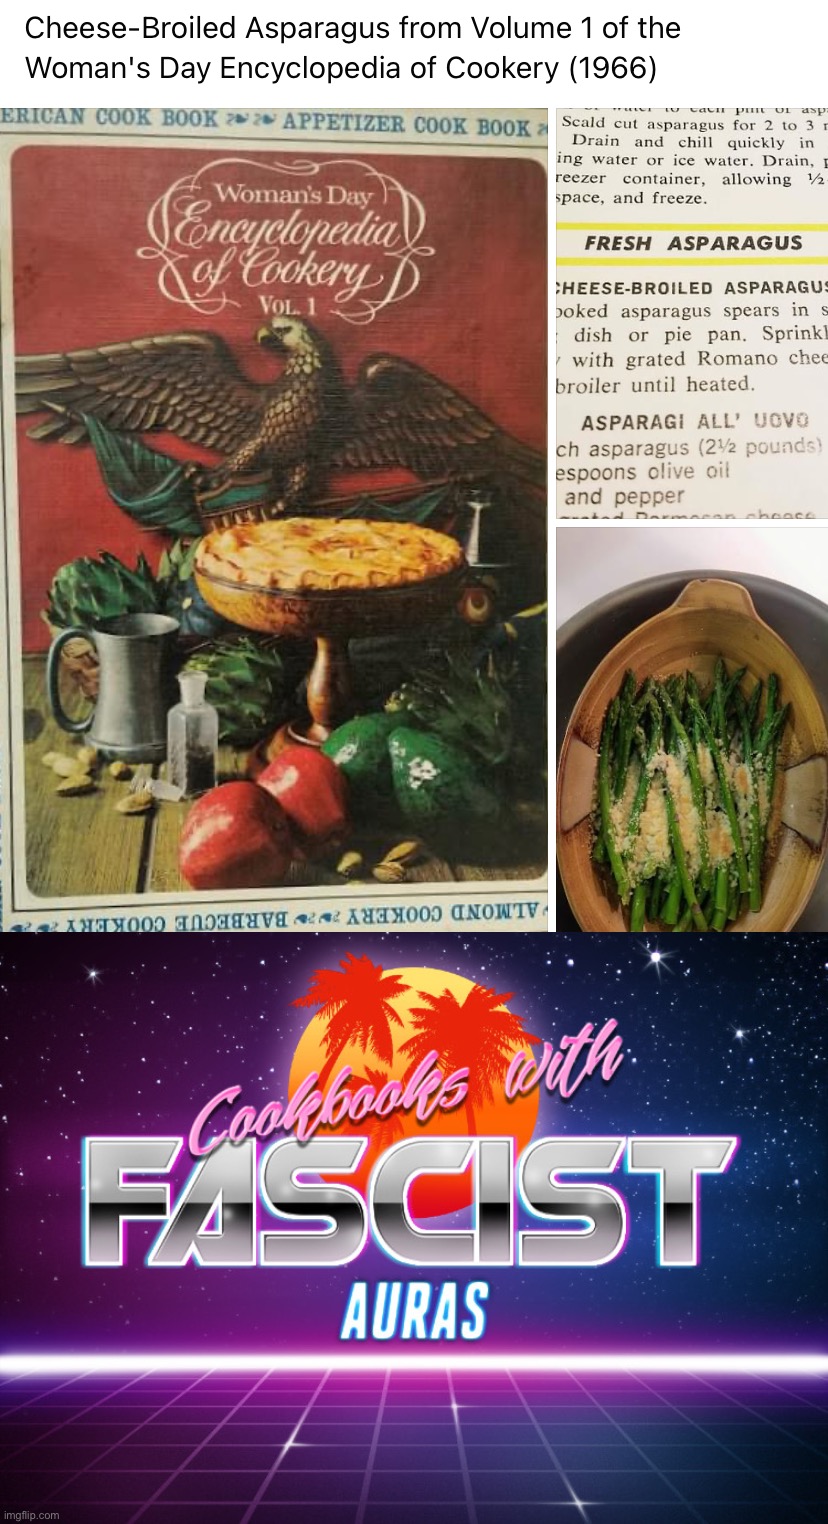 Cheese-broiled asparagus: Far-right-upper policomp corner confirmed | image tagged in cookbooks with fascist auras,f,a,s,c,ism | made w/ Imgflip meme maker